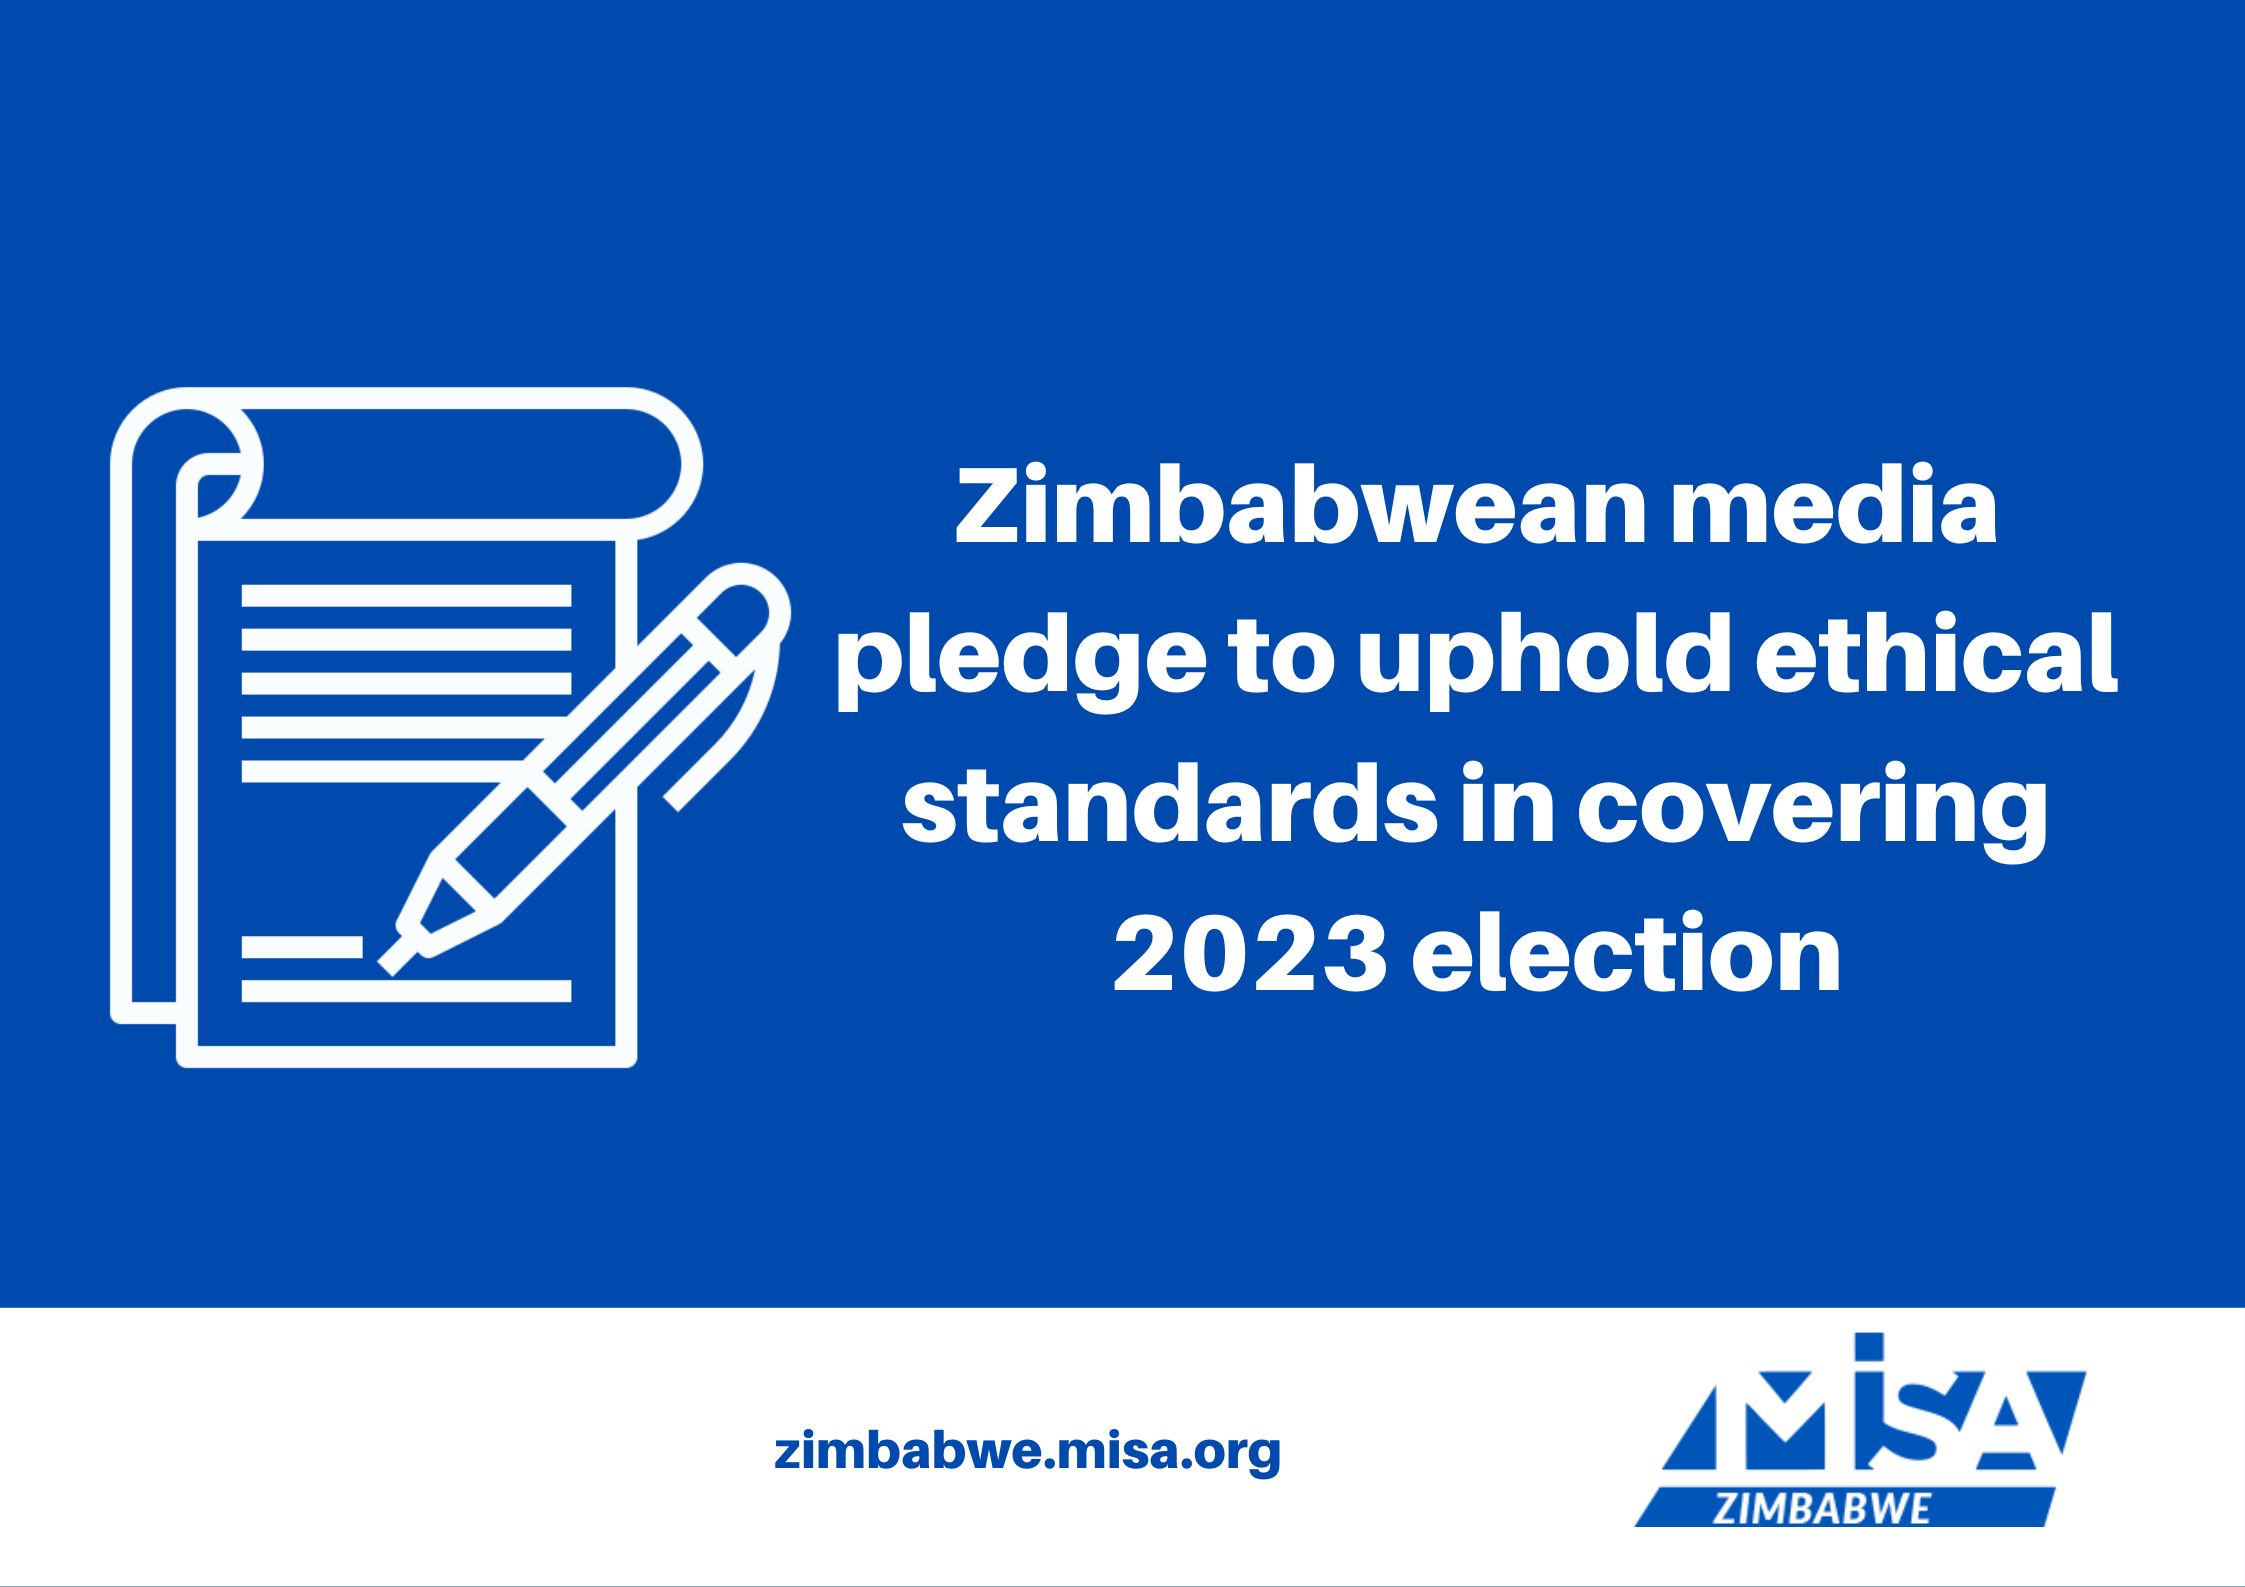 Zimbabwean media pledge to uphold ethical standards in covering 2023 election